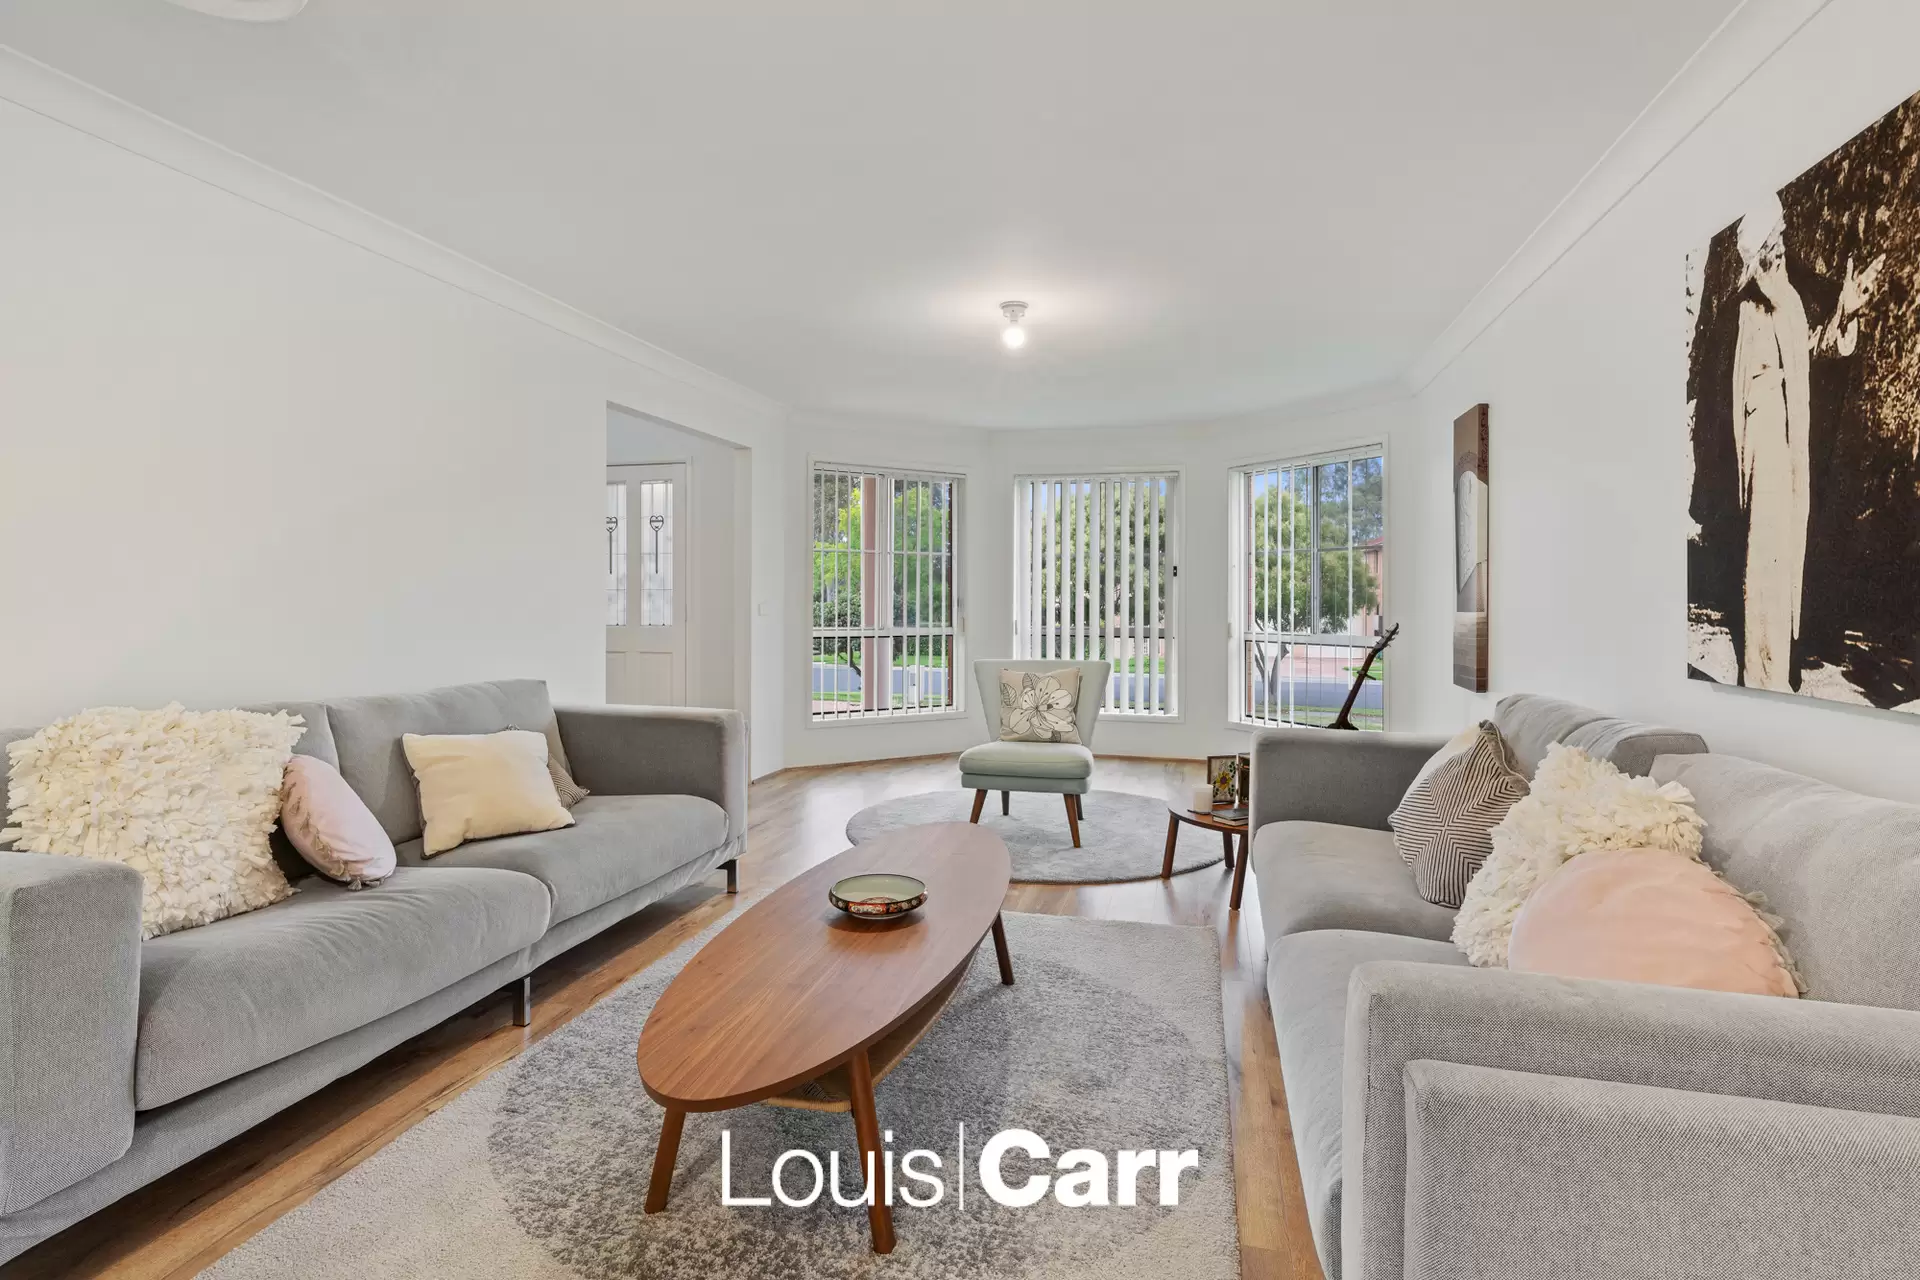 29 Macquarie Avenue, Kellyville Leased by Louis Carr Real Estate - image 1